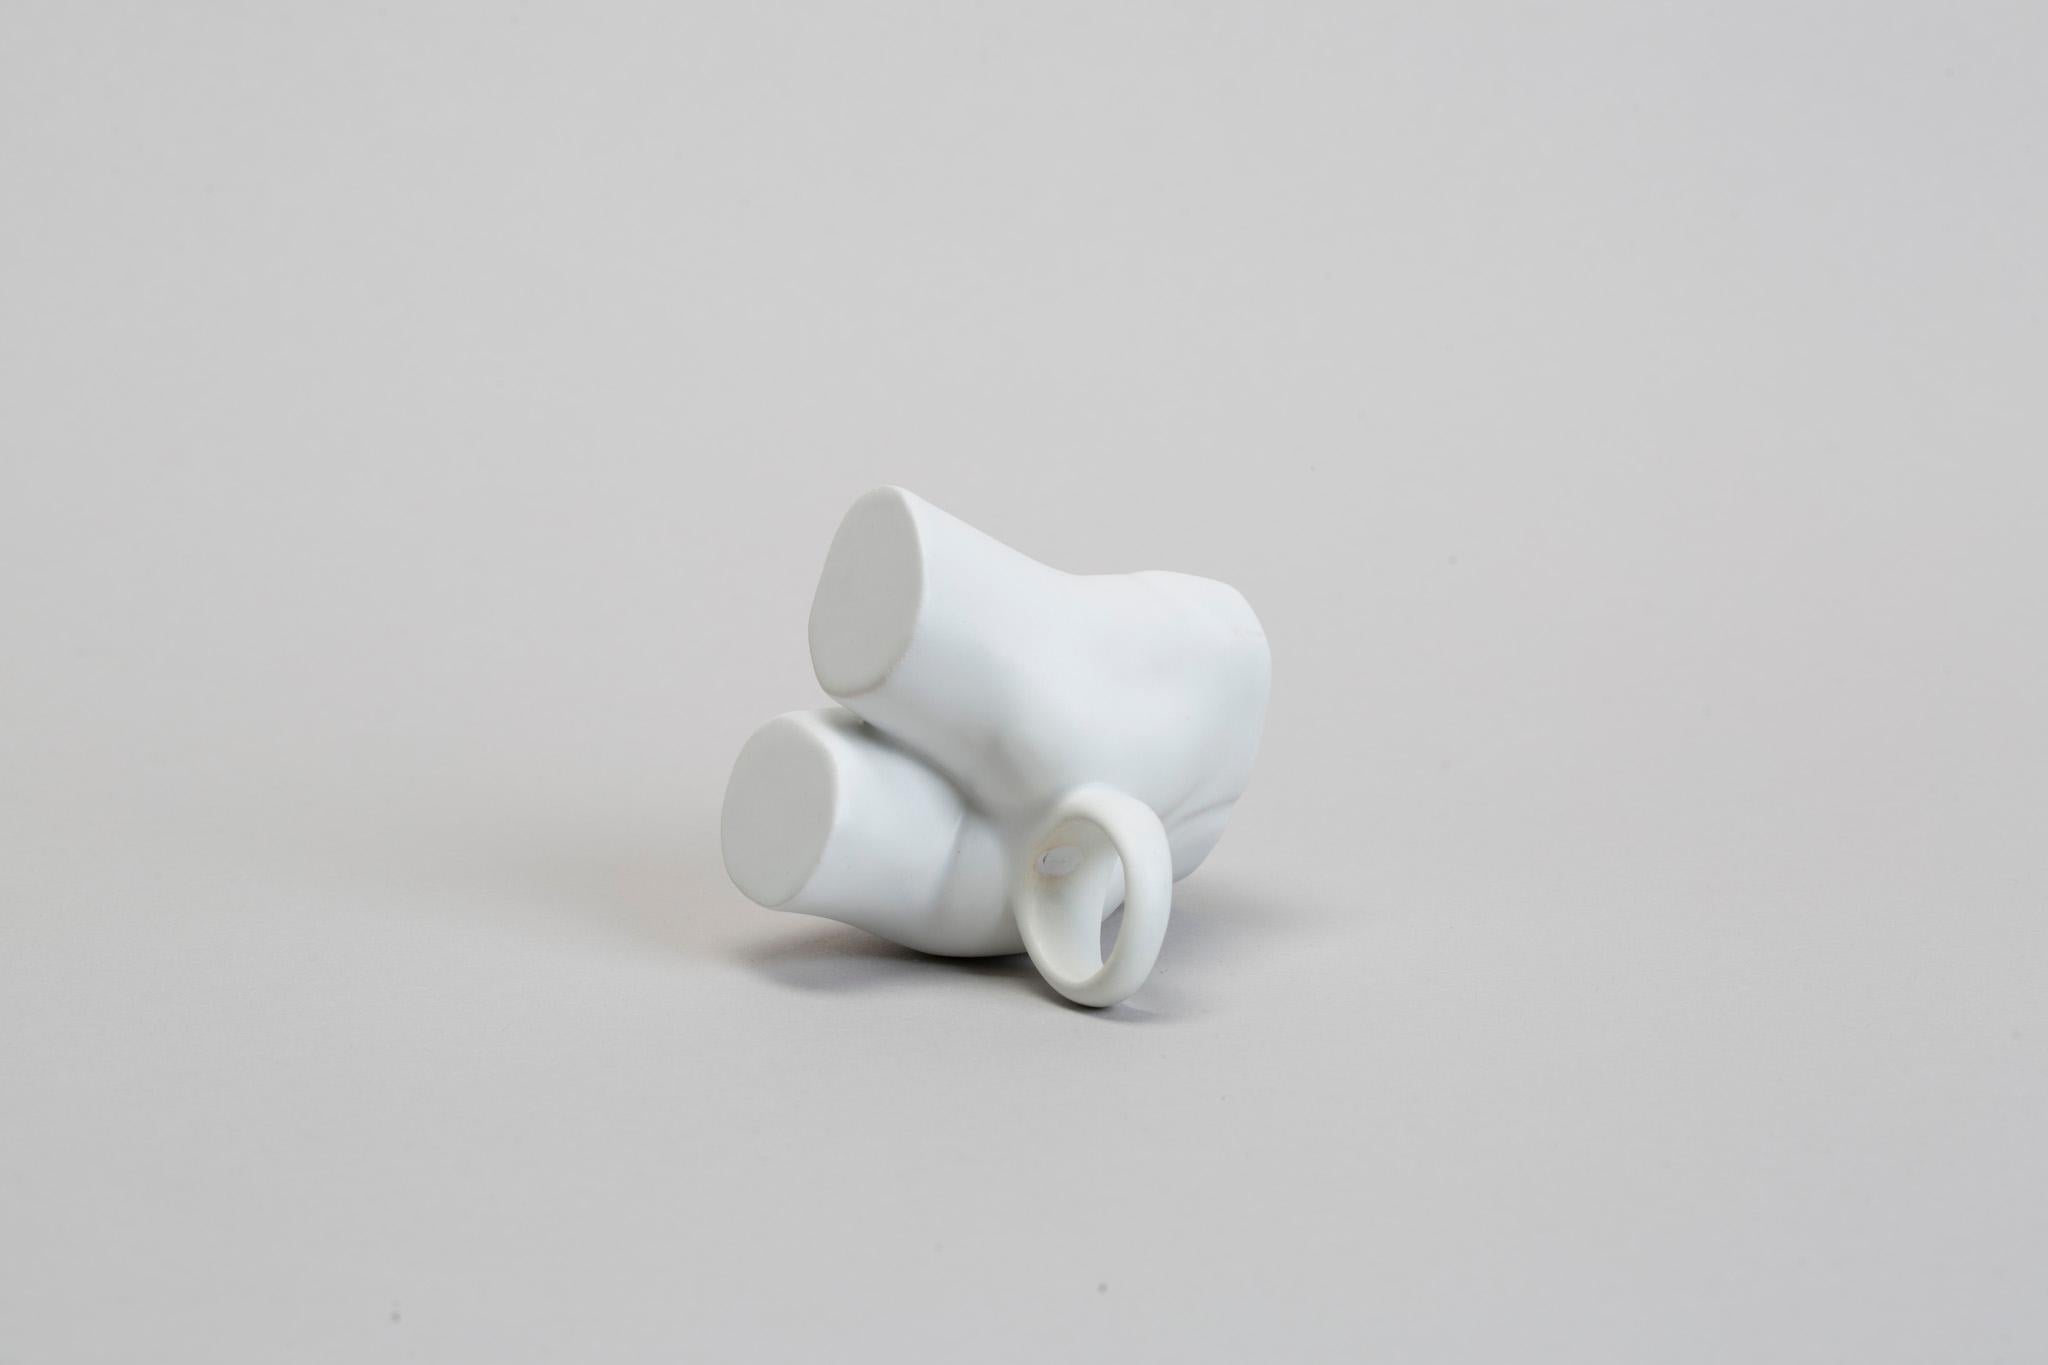 Michelangelo Prèt-a-porter Ceramic Sculptural Ring Contemporary In New Condition For Sale In London, GB